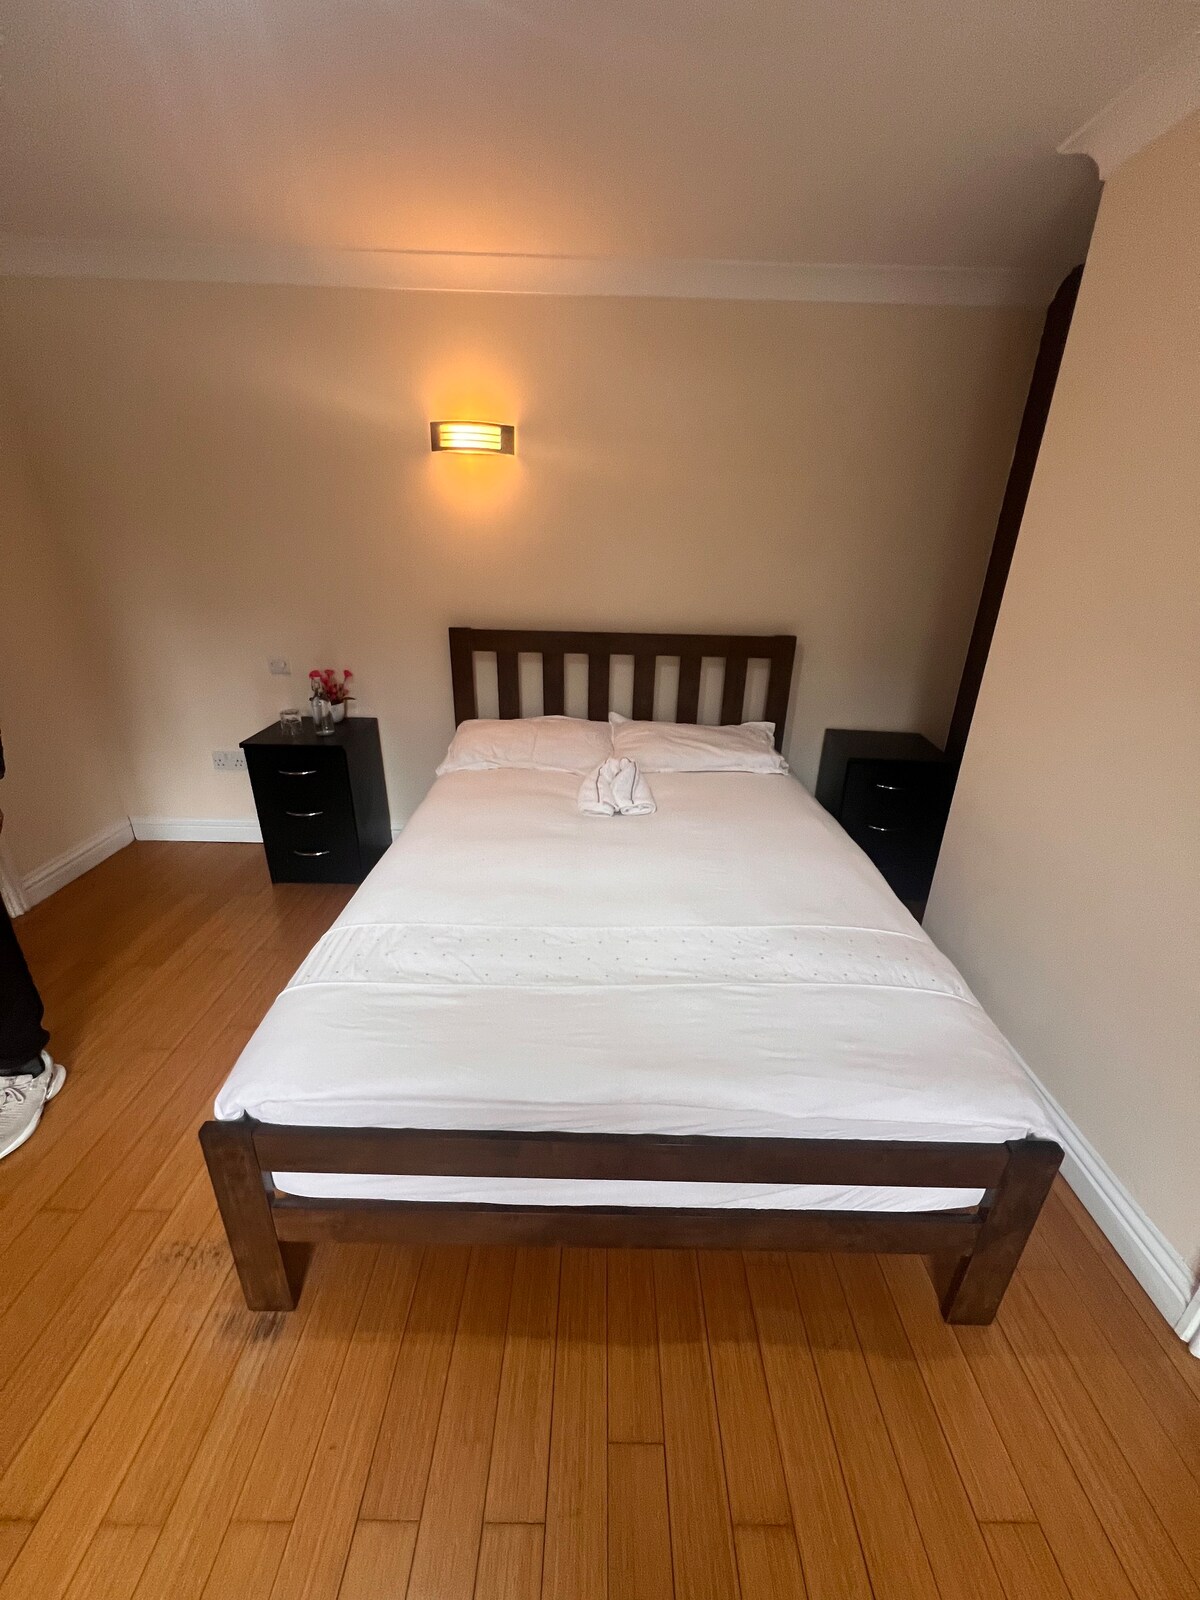 Sultania moral and restaurant double room